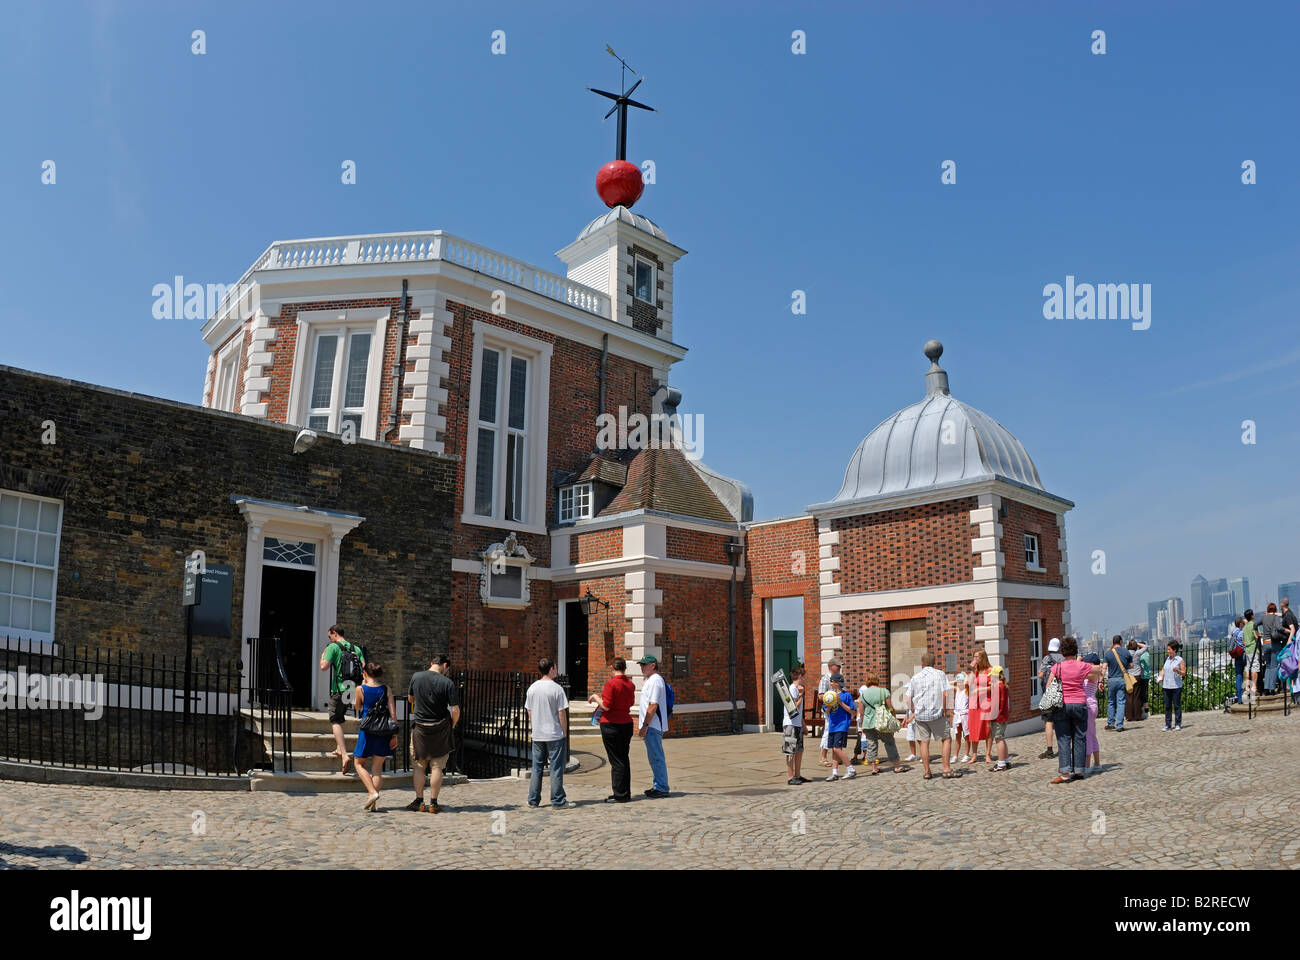 Octagon Room and Time Ball, Royal Observatory Greenwich Stock Photo